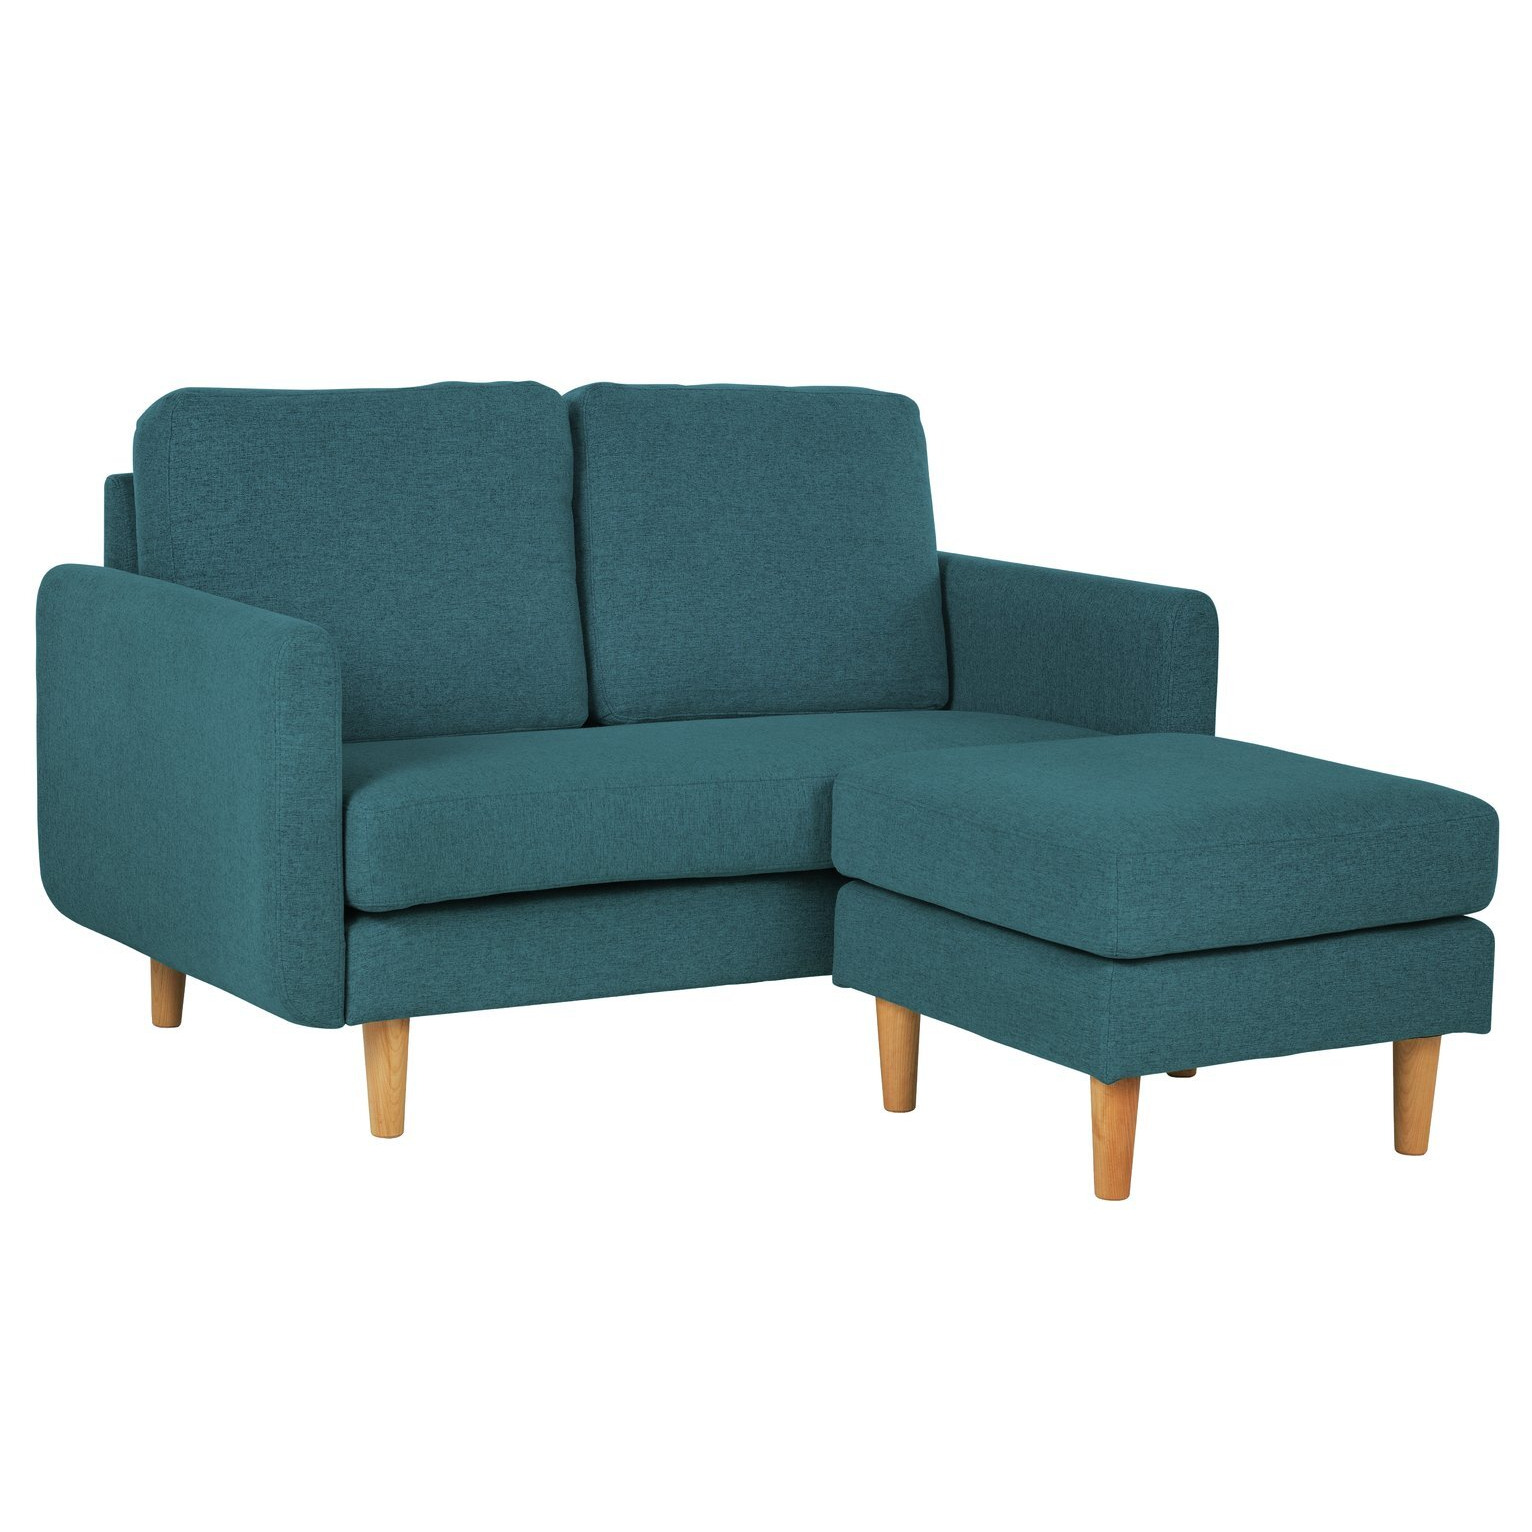 Habitat Remi Fabric 2 Seater Chaise Sofa in a box - Teal - image 1